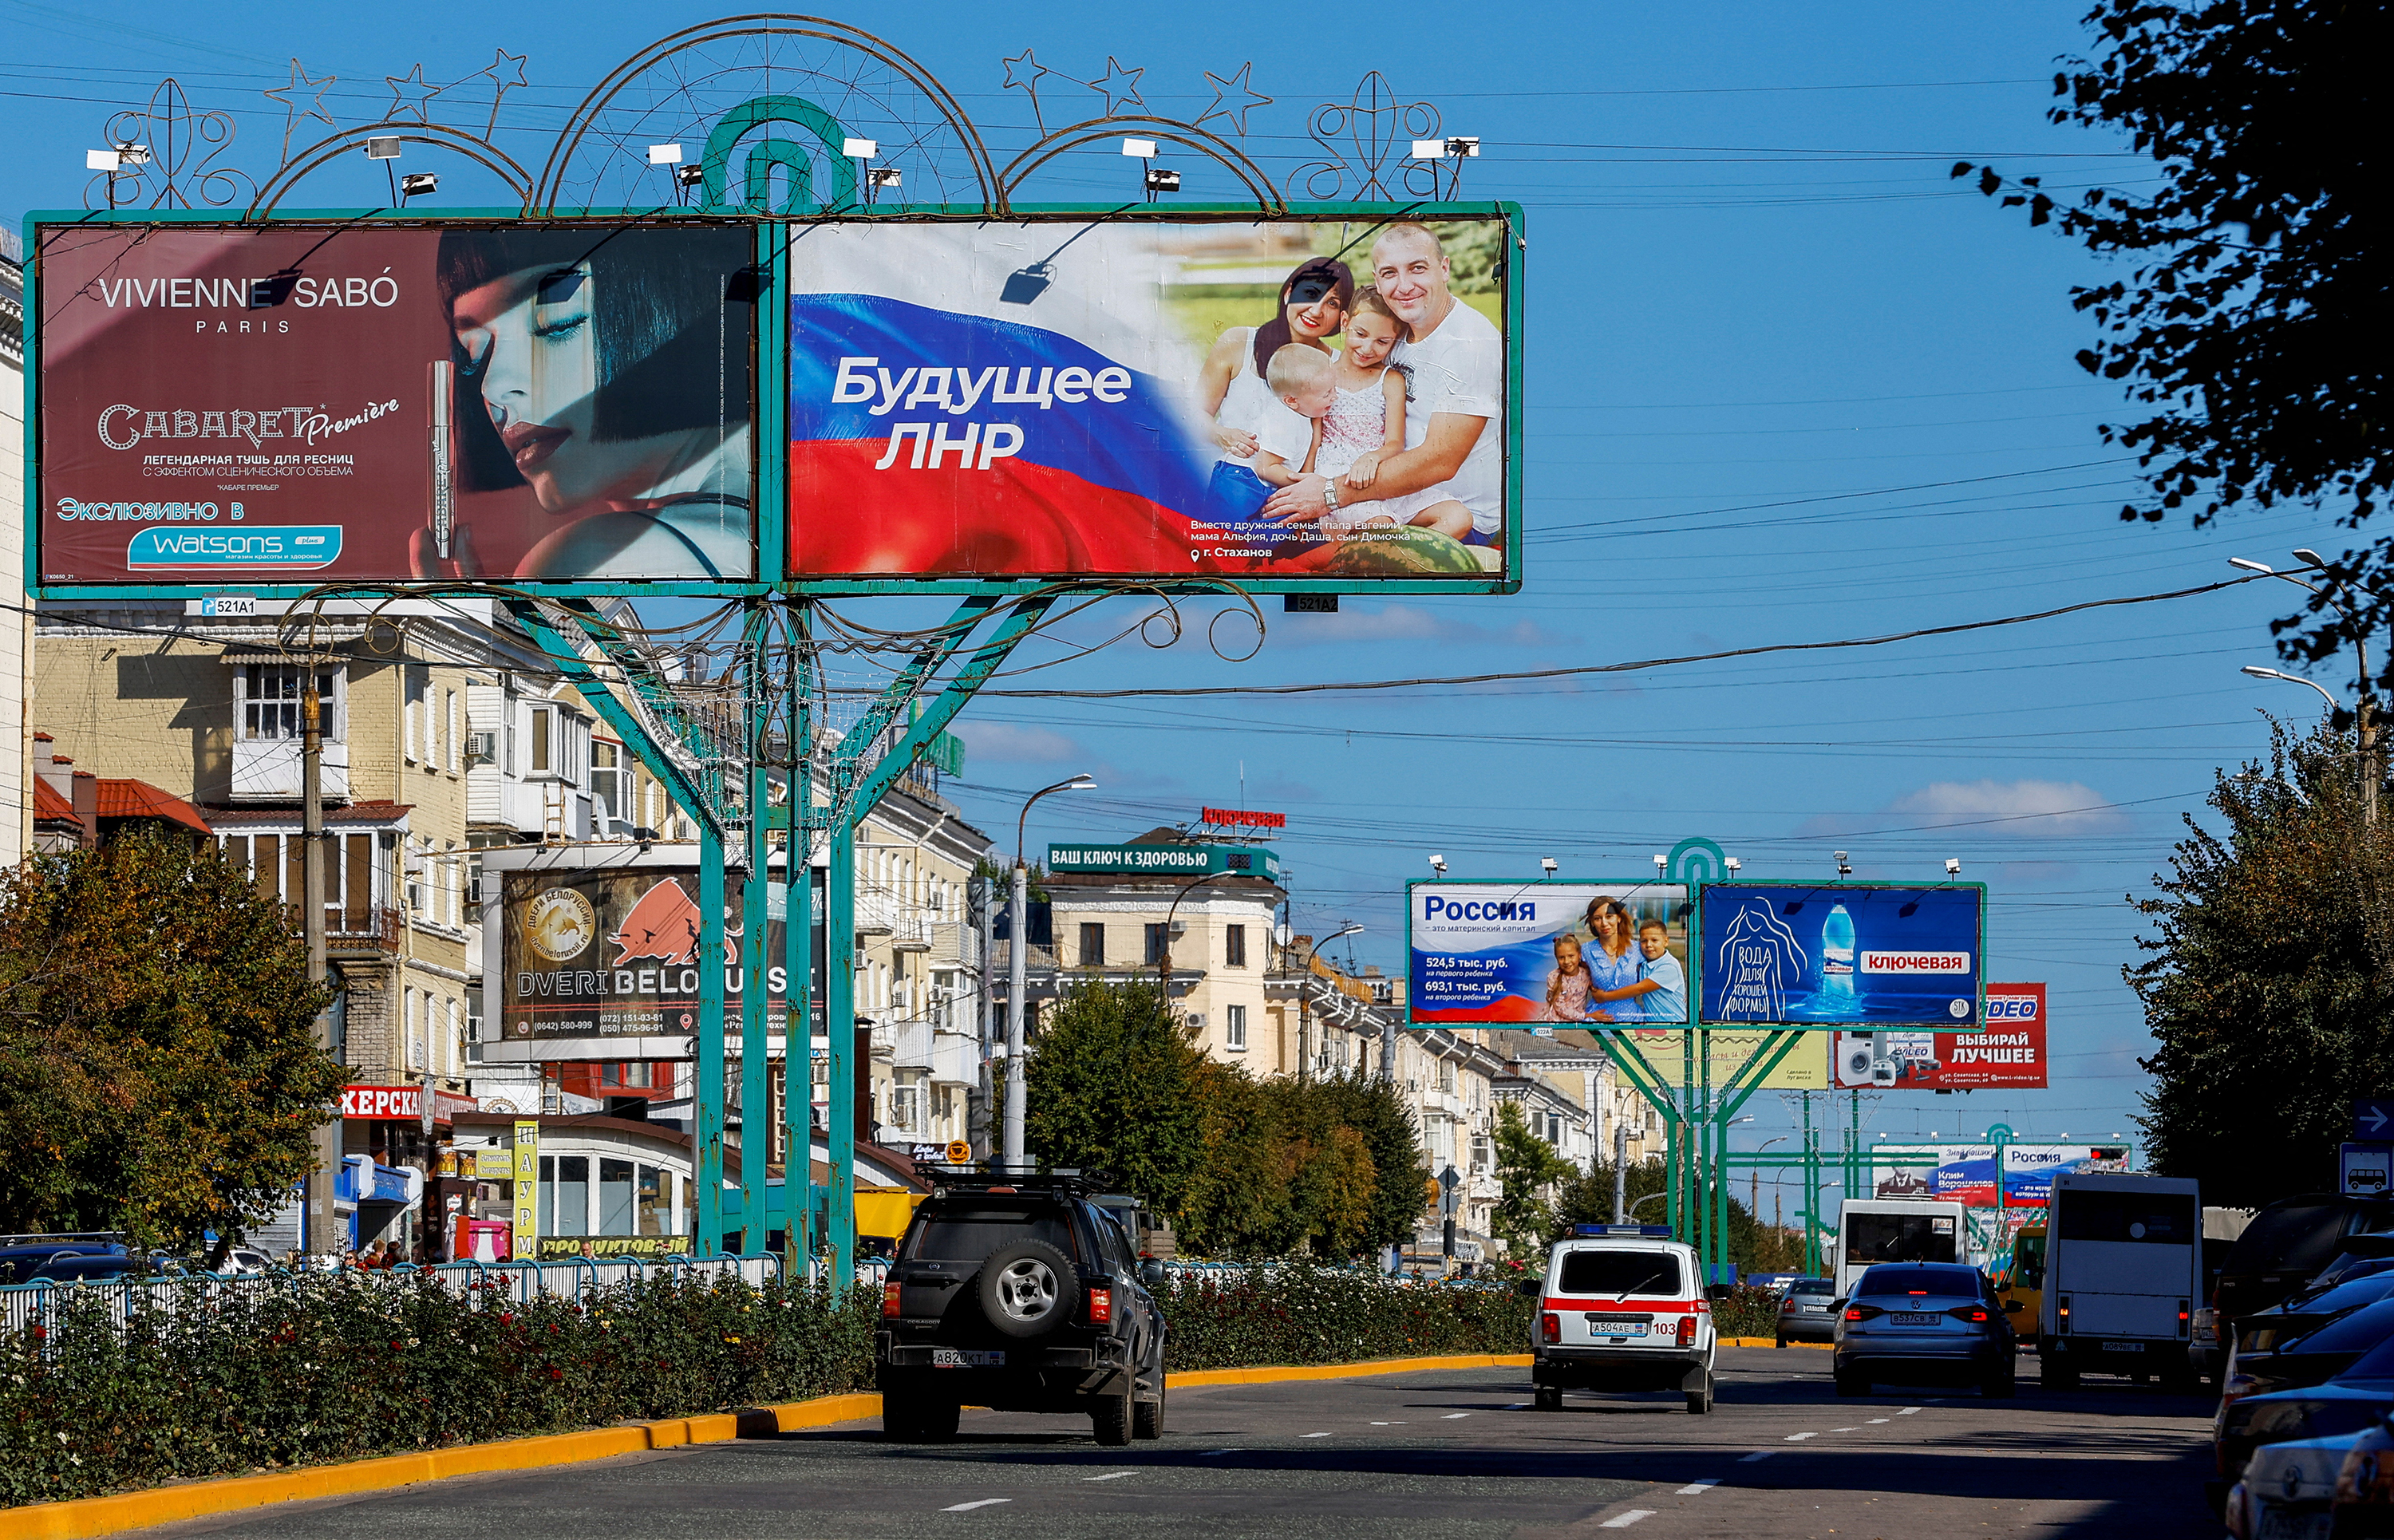 Vehicles drive past billboards, including panels with pro-Russian slogans, on a street during the conflict between Russia and Ukraine in Luhansk, Ukraine on September 20.